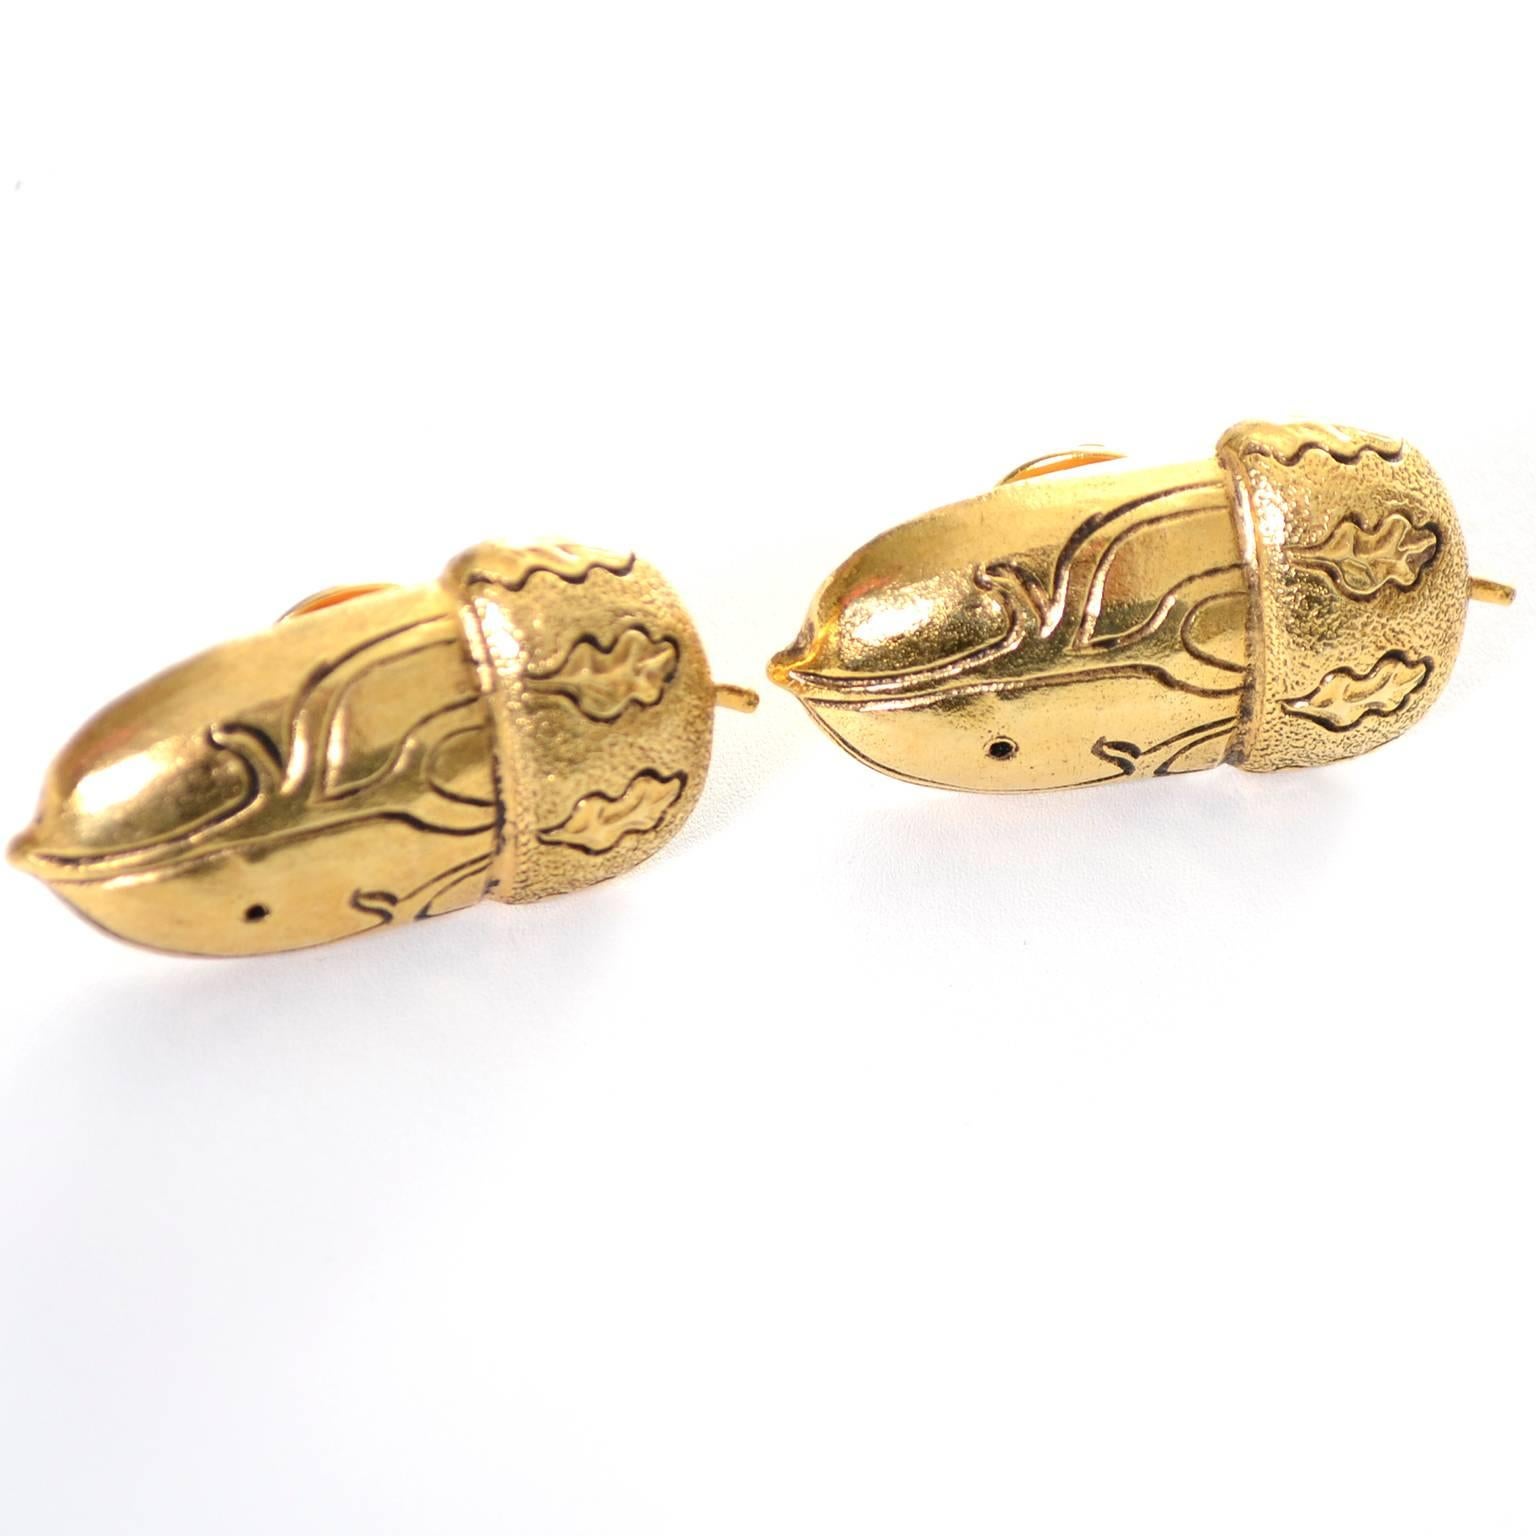 This is a rare, beautiful pair of signed Isabel Canovas acorn pins from the 1980s.  The pins measure 1 and 1/4 inches by 3/4 inches and are beautifully etched with fine details.